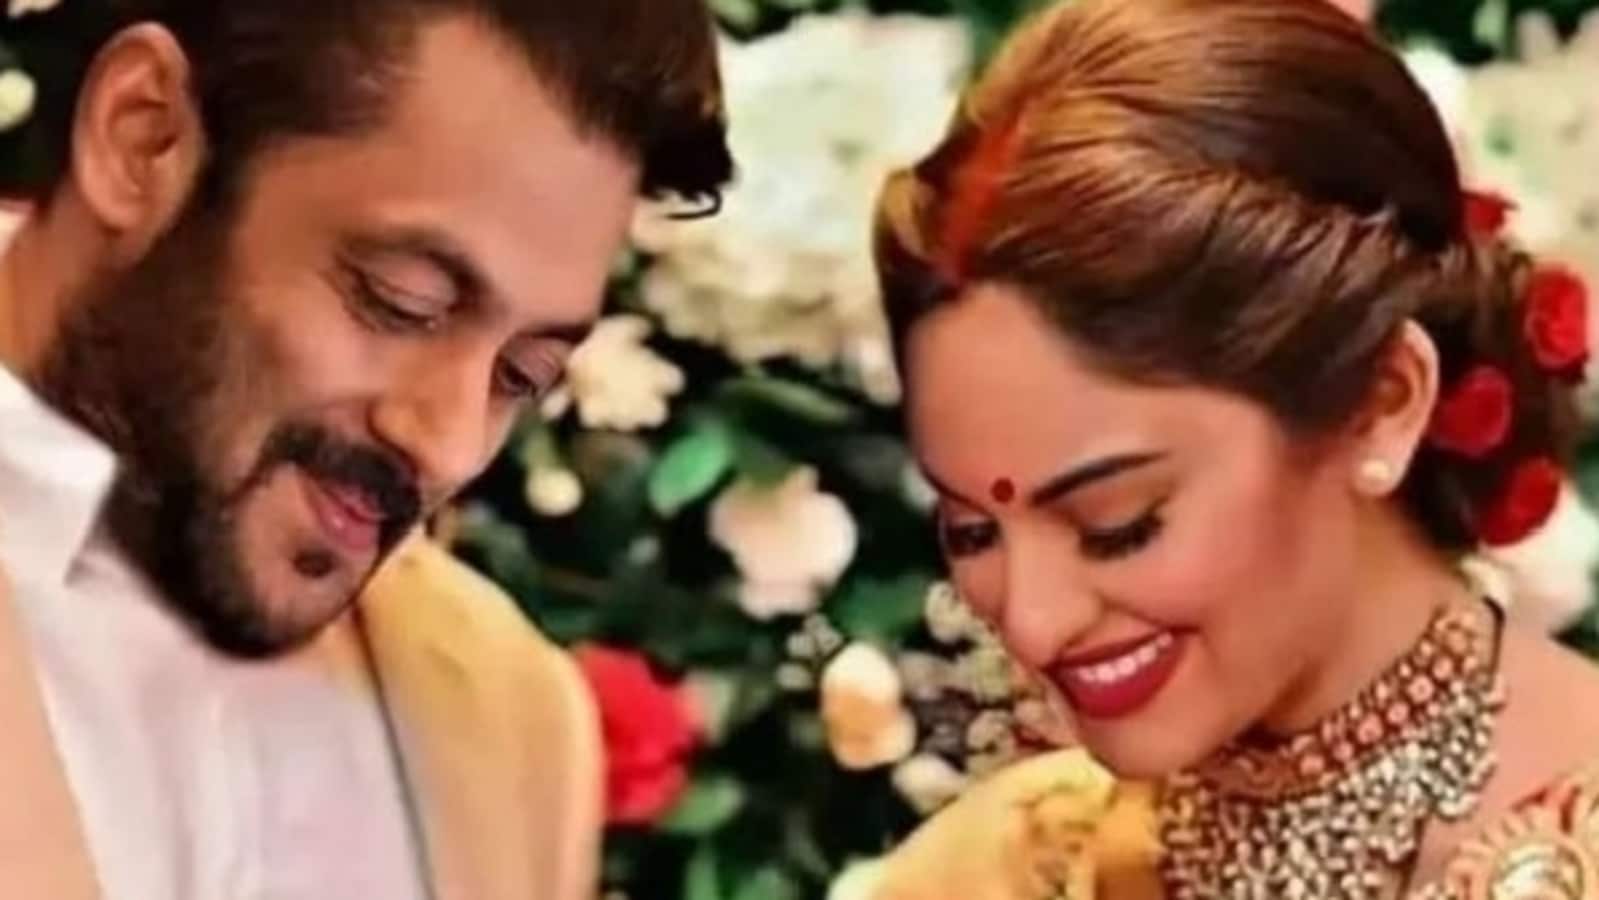 1599px x 900px - Salman, Sonakshi's fans are confused as fake pic shows them as a married  couple | Bollywood - Hindustan Times